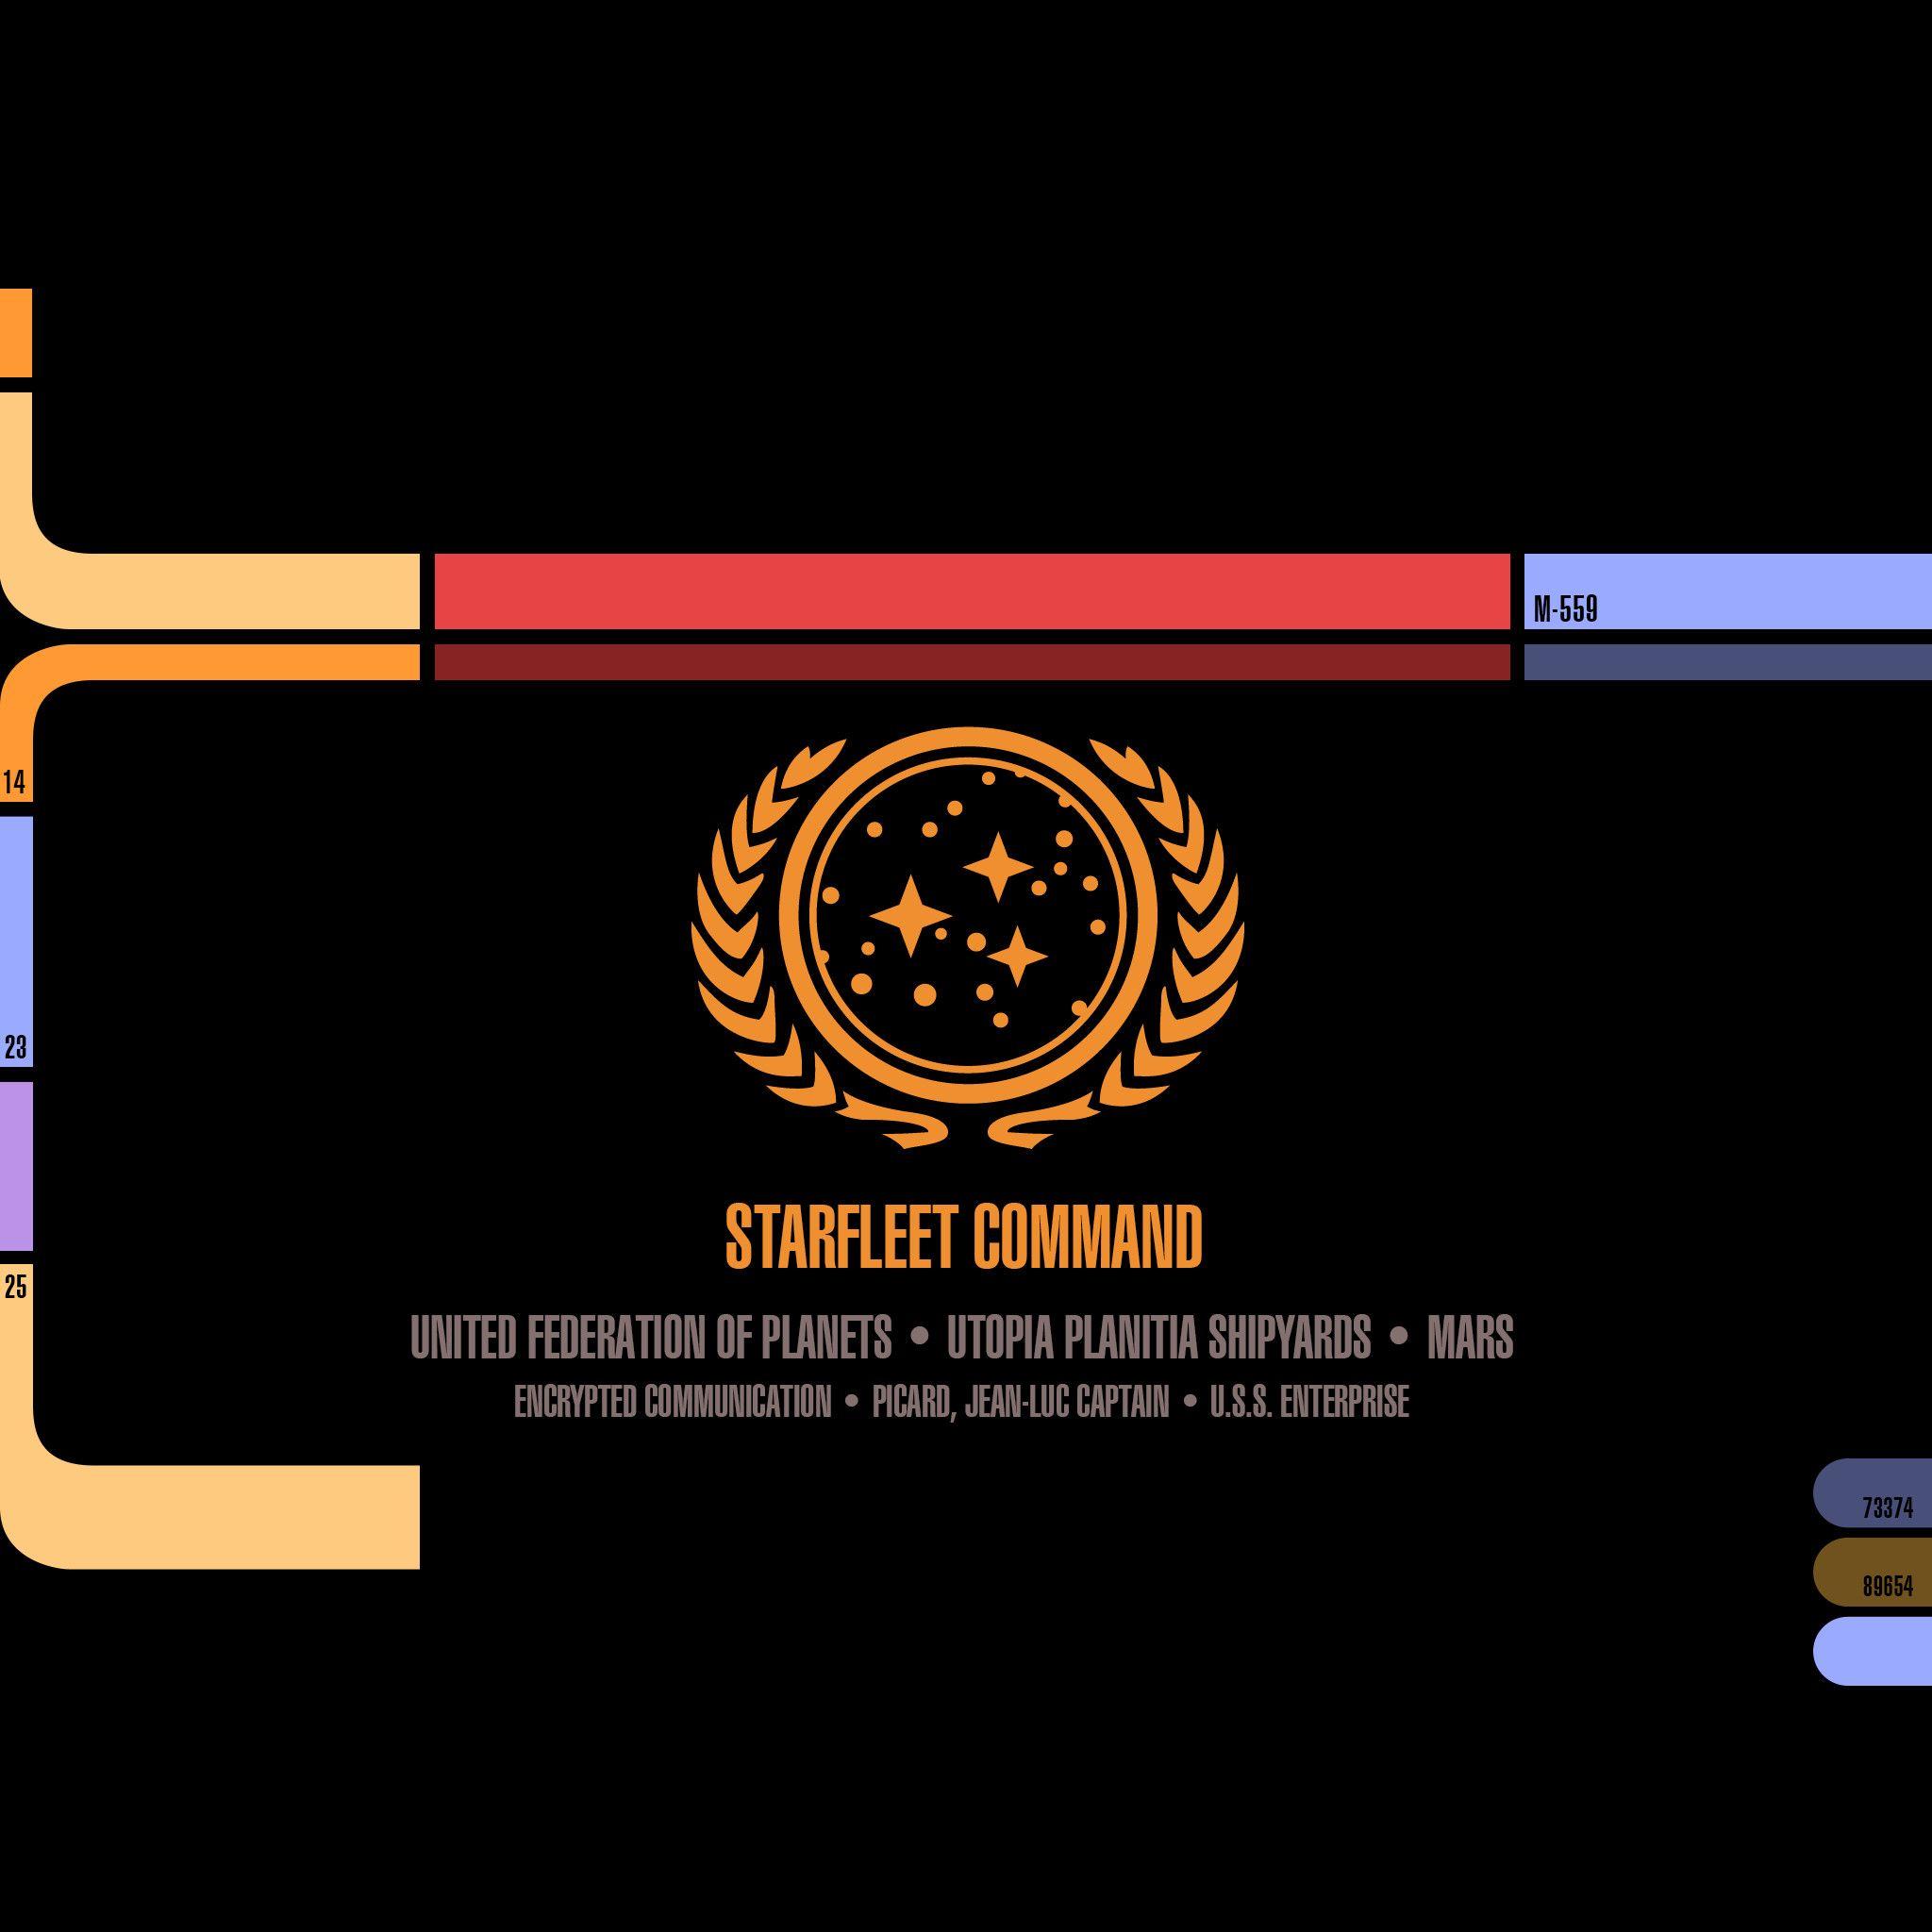 A black background with a colorful line graph of Starfleet Command. - Star Trek